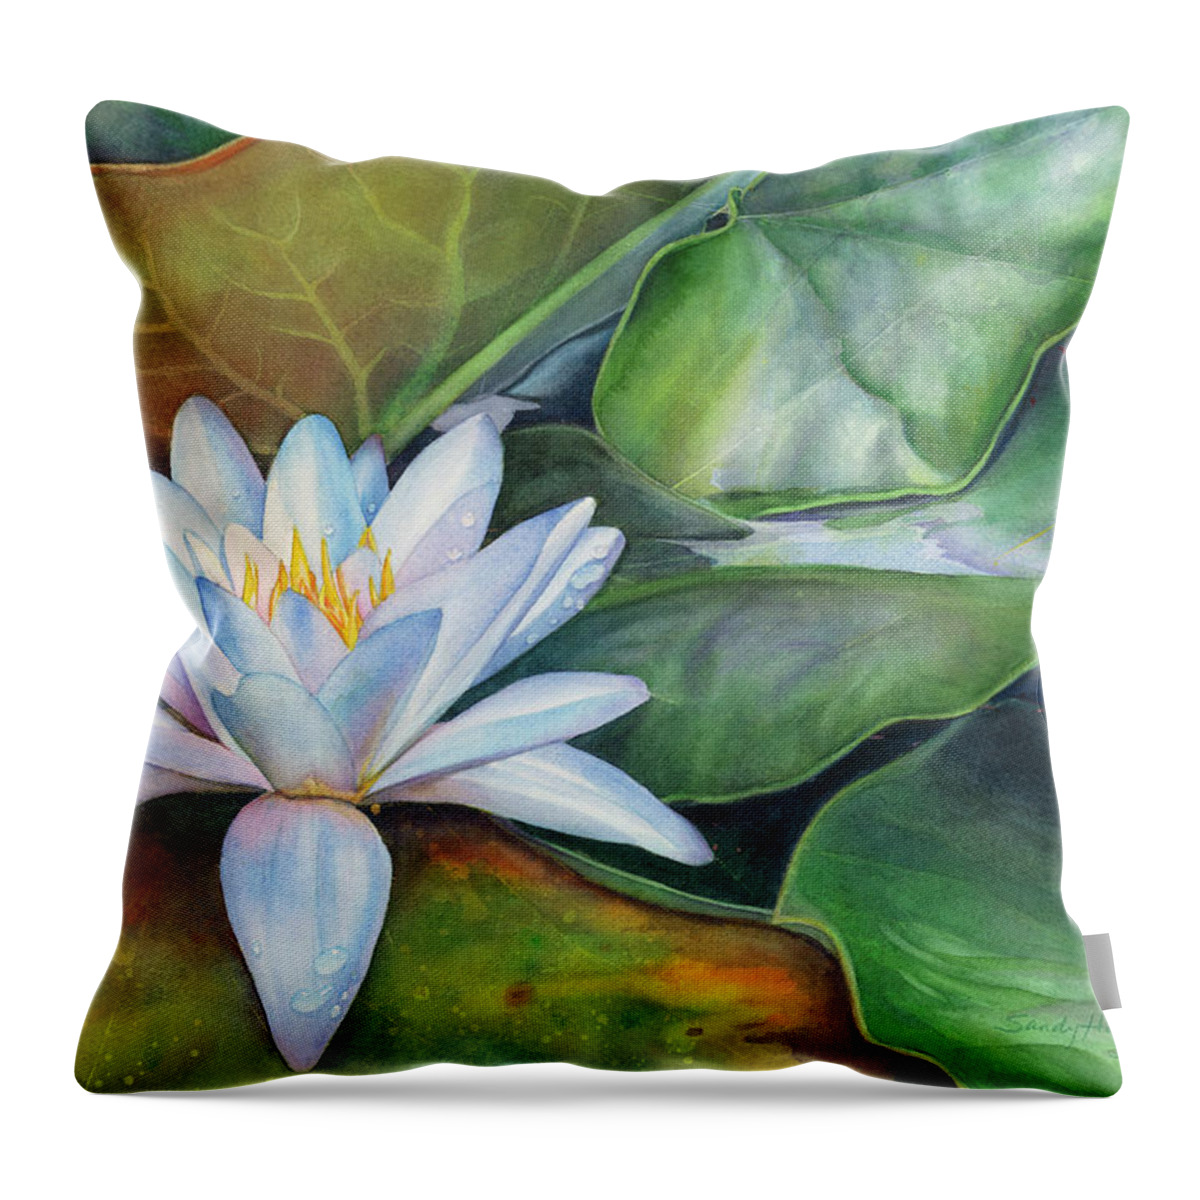 Original Watercolor Painting Throw Pillow featuring the painting Arboretum Star by Sandy Haight